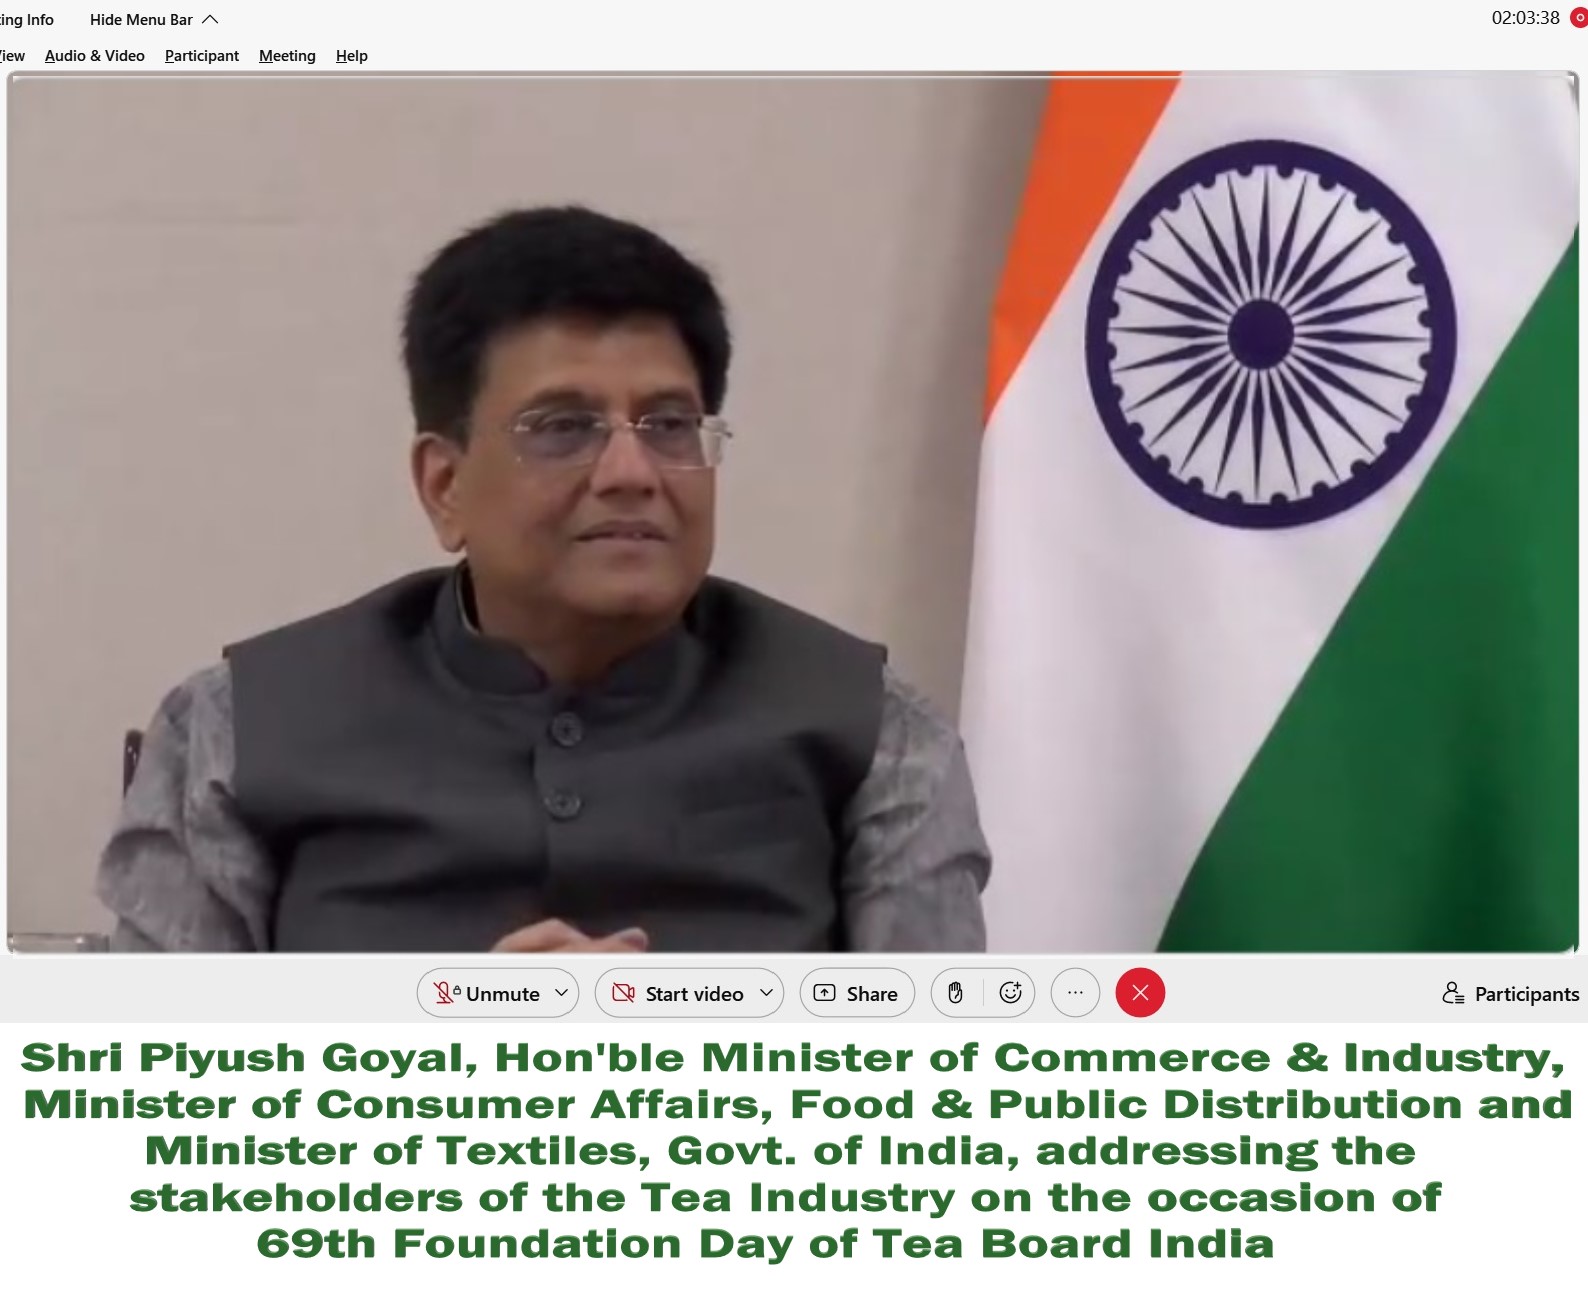 Shri Piyush Goyal, Hon'ble Minister of Commerce & Industry, Minister of Consumer Affairs, Food & Public Distribution and Minister of Textiles, Govt. of India addressing the stakeholders of the Tea Industry on the occasion of 69th Foundation Day of Tea Board India, 01/04/2022